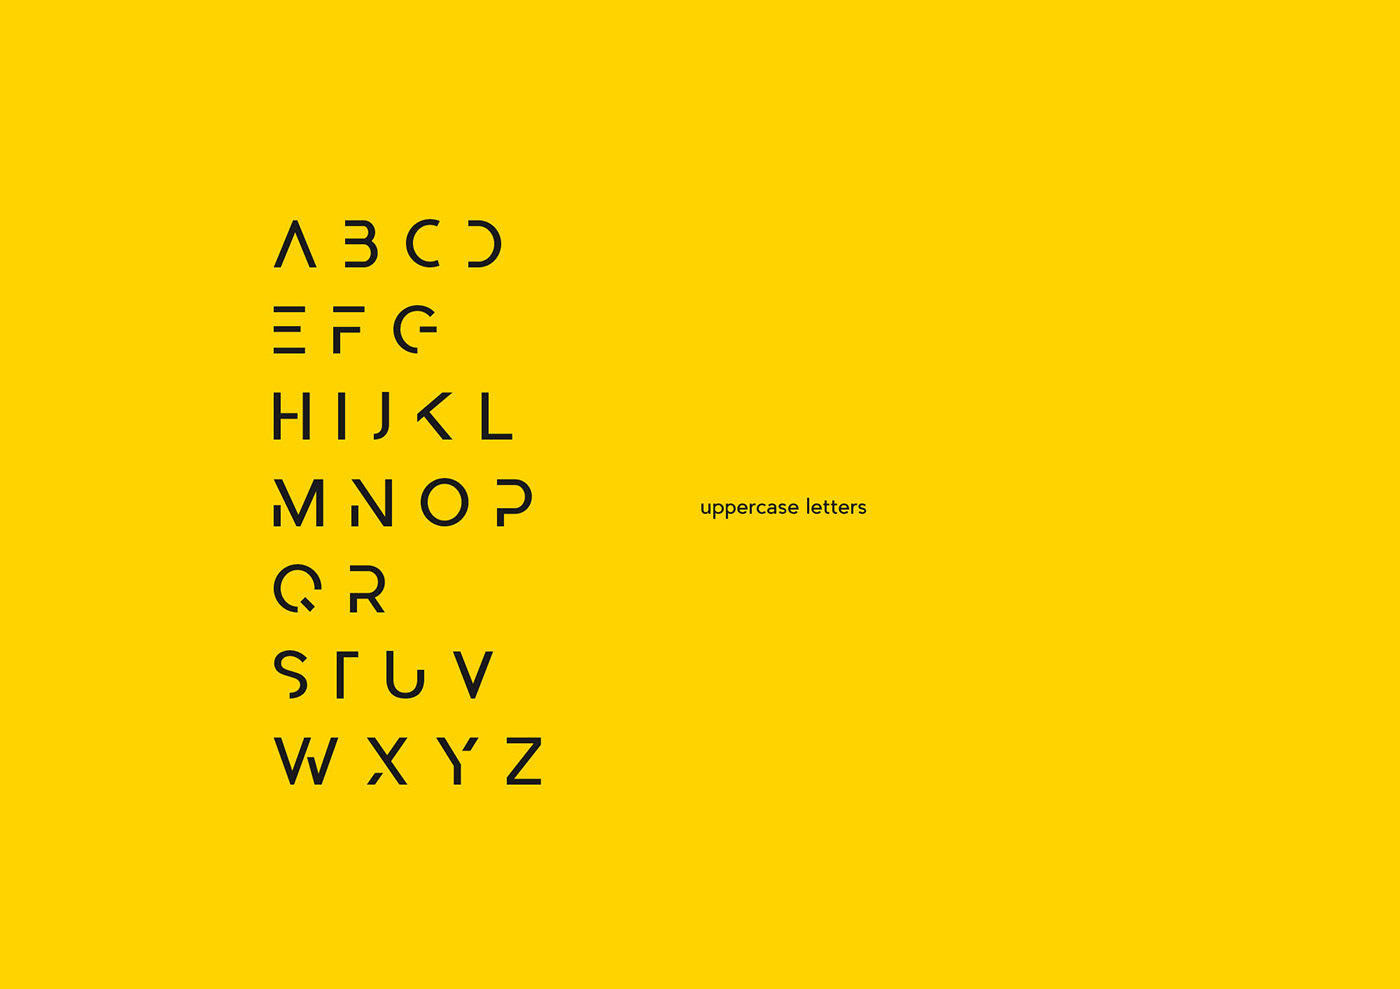 Free font freebie download Typeface abster